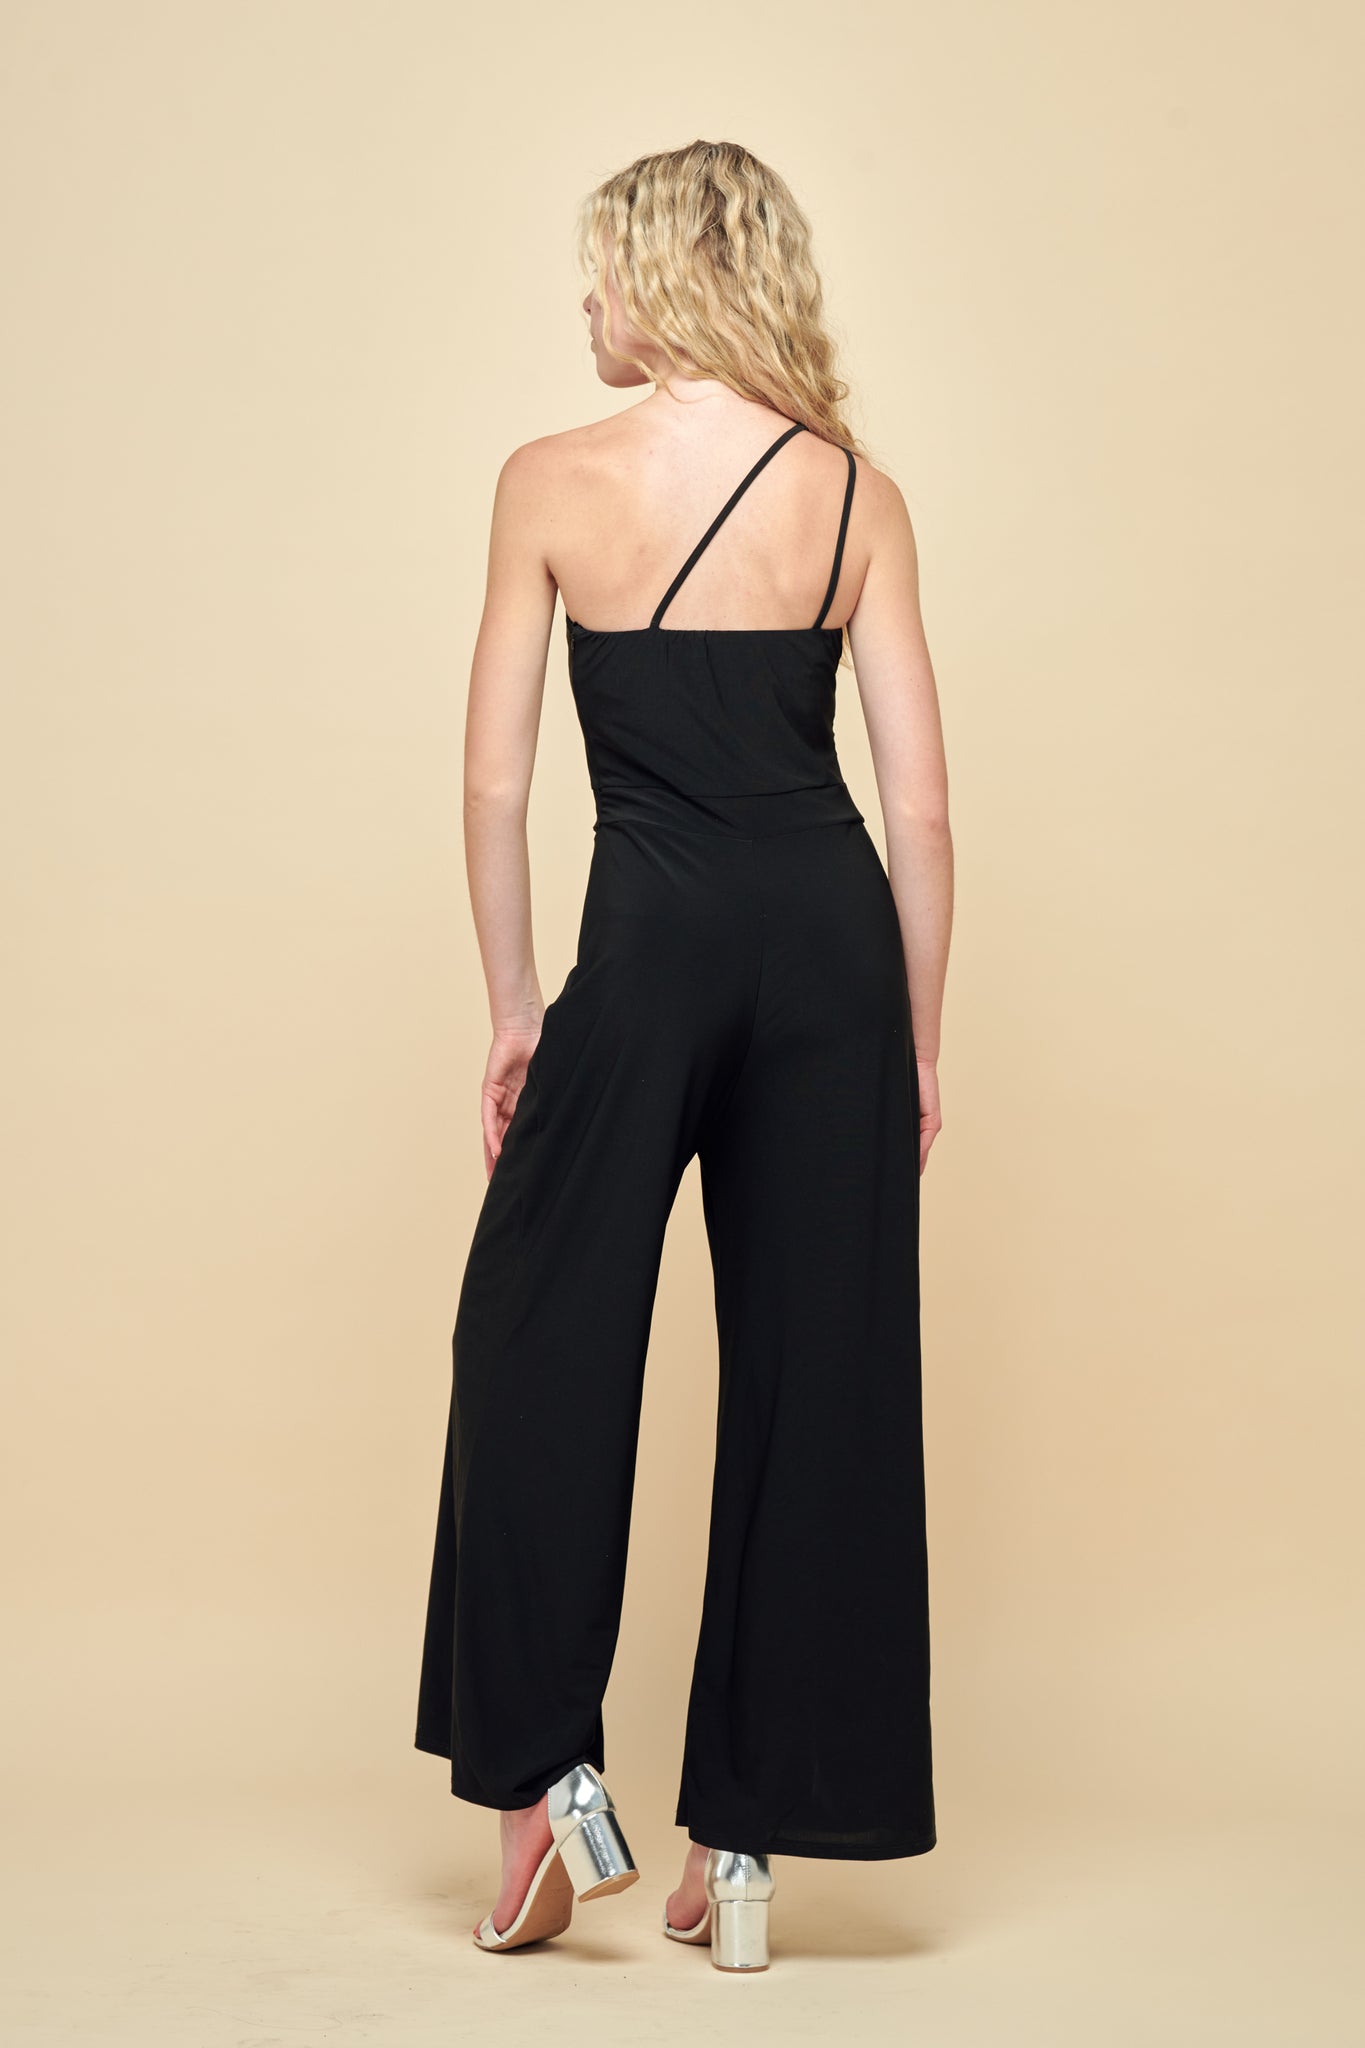 Blonde girl in a one shoulder, wide leg jumpsuit with silver heel.